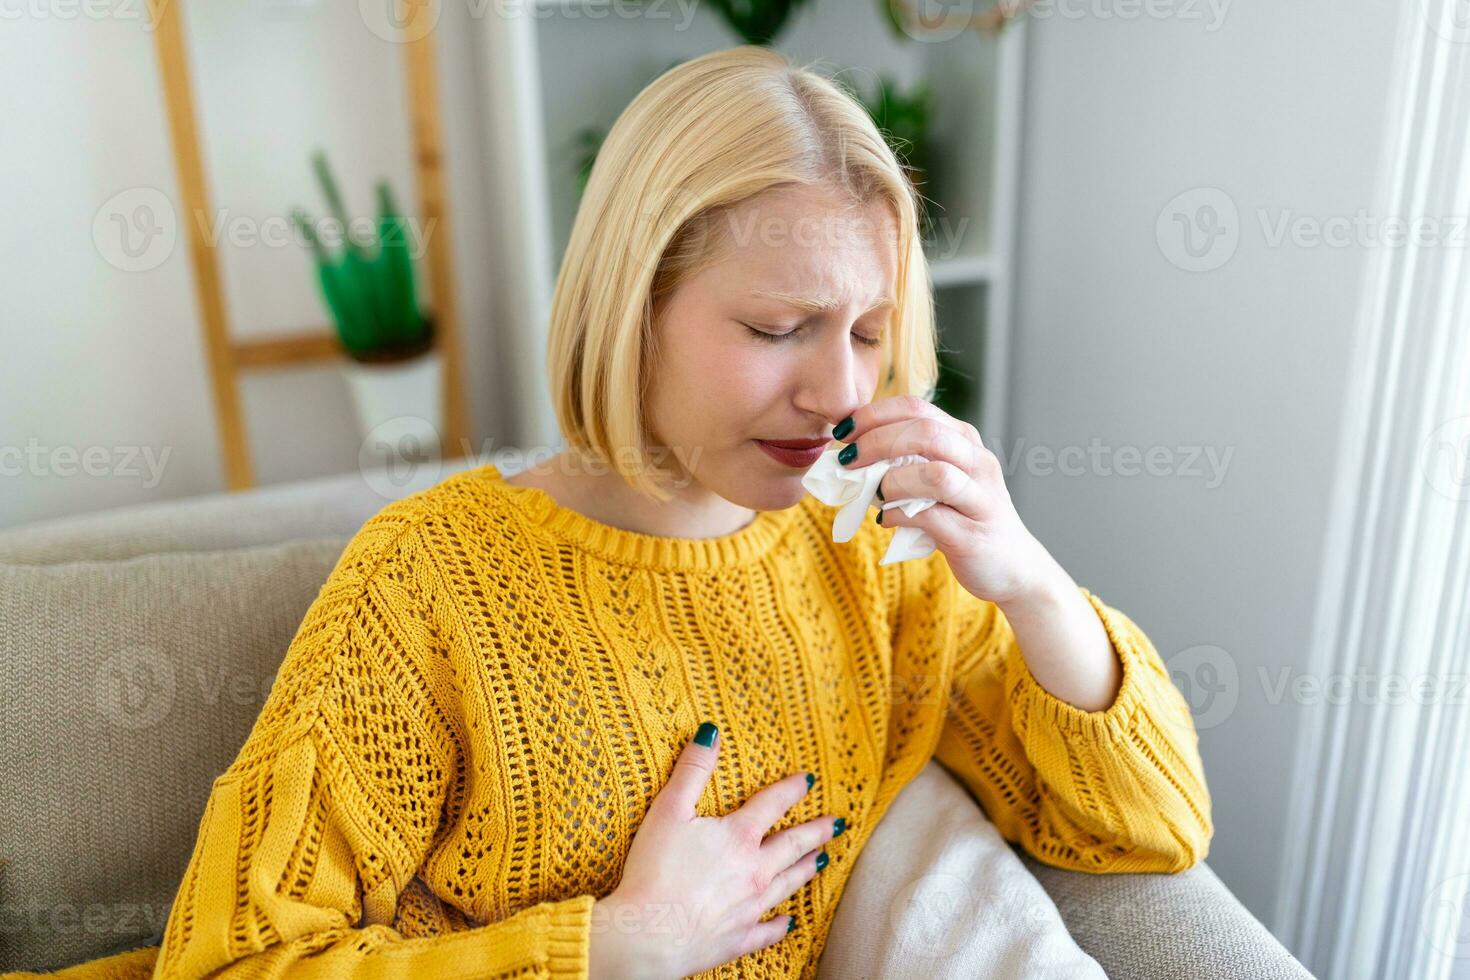 Sick Woman.Flu.Woman Caught Cold. Sneezing into Tissue. Headache. Virus .Medicines. Young Woman Infected With covid 19 Blowing Her Nose In Handkerchief. Sick woman with a headache sitting on a sofa photo